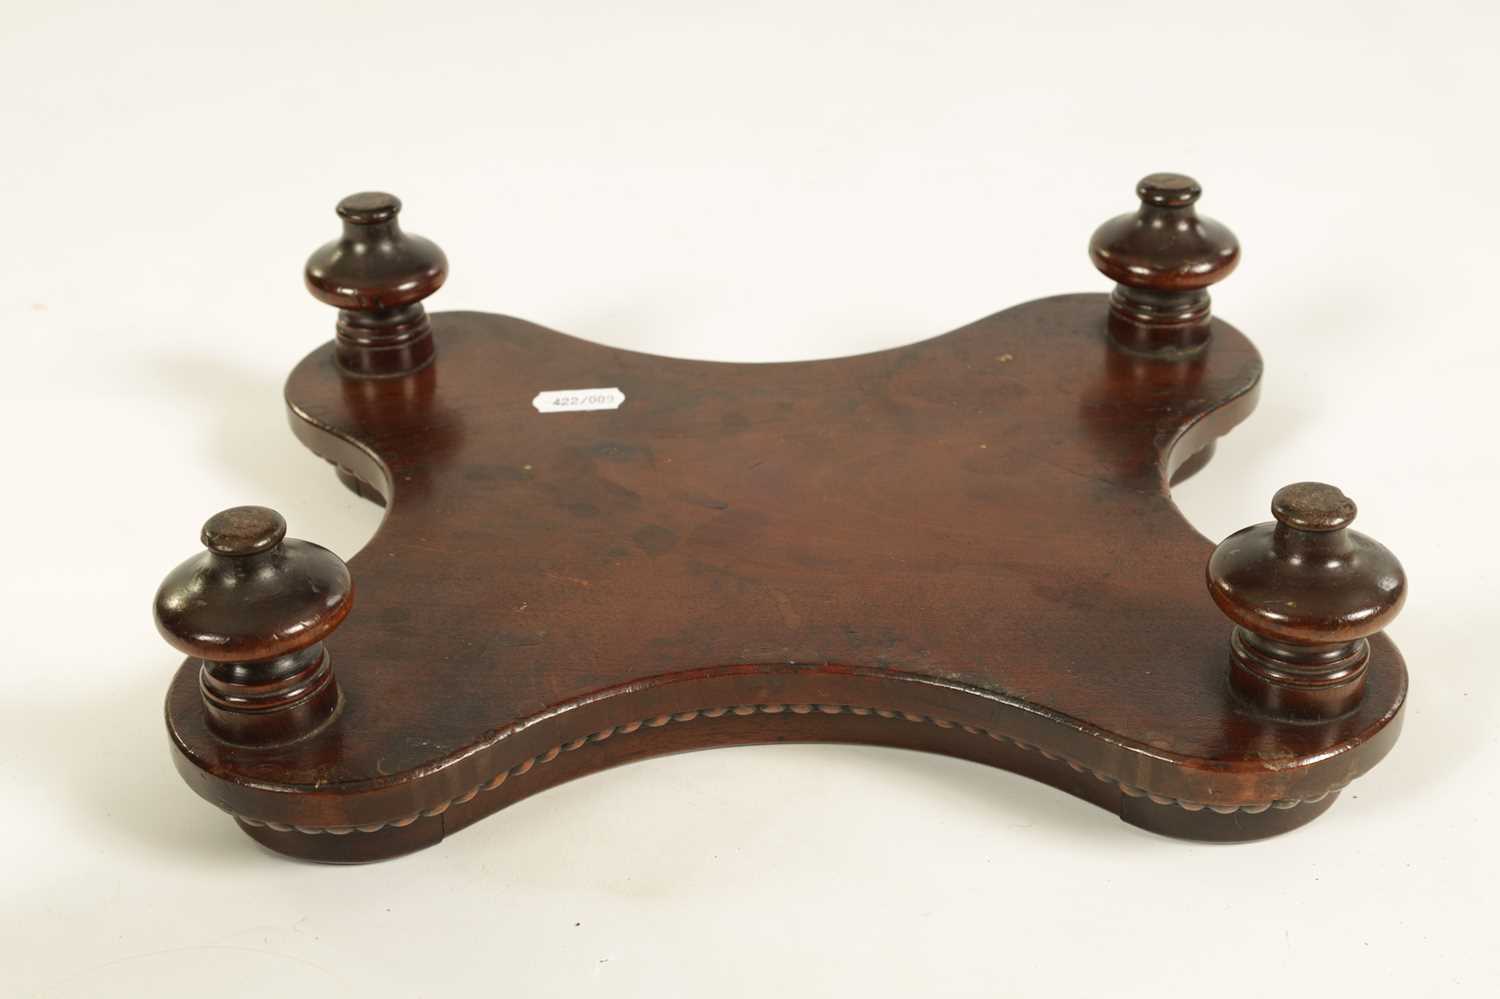 A LATE GEORGIAN MAHOGANY TABLE URN STAND IN THE MANNER OF GILLOWS - Image 4 of 4